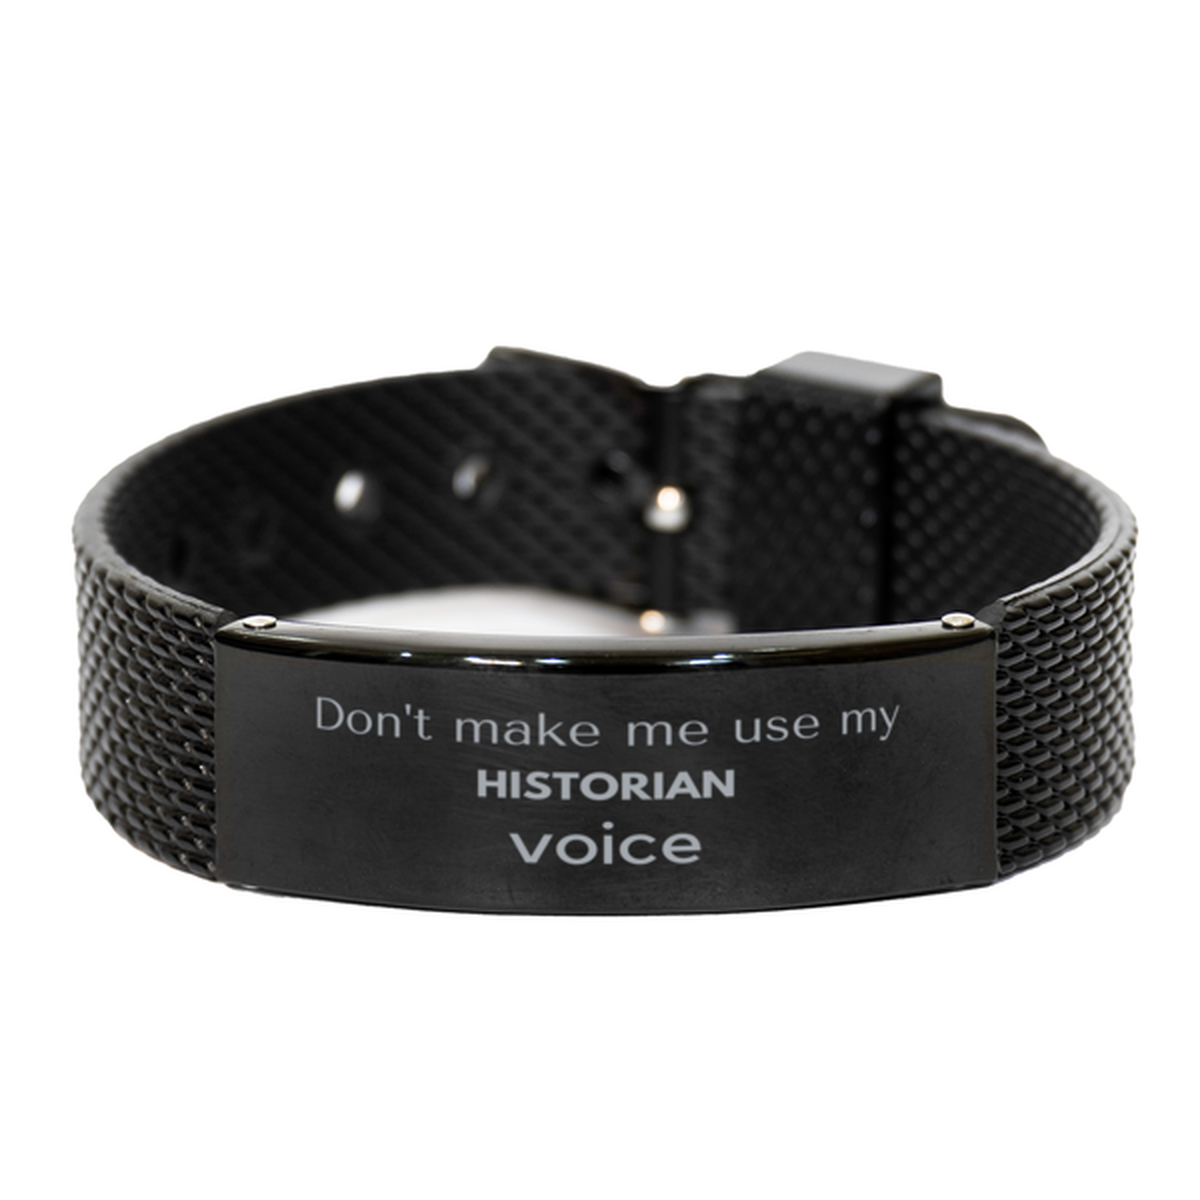 Don't make me use my Historian voice, Sarcasm Historian Gifts, Christmas Historian Black Shark Mesh Bracelet Birthday Unique Gifts For Historian Coworkers, Men, Women, Colleague, Friends